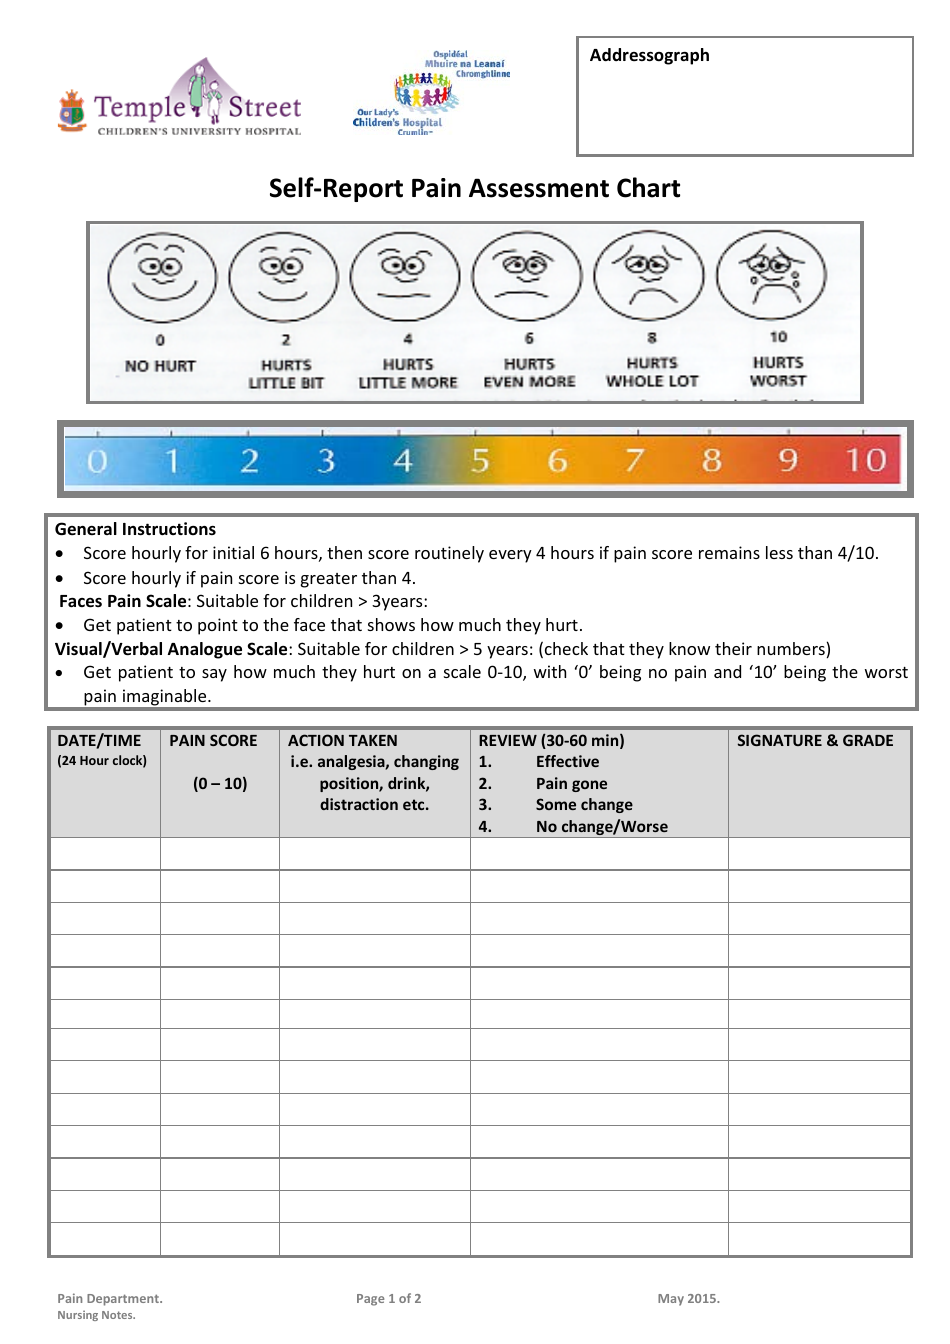 Self-report Pain Assessment Chart - Temple Street, Page 1